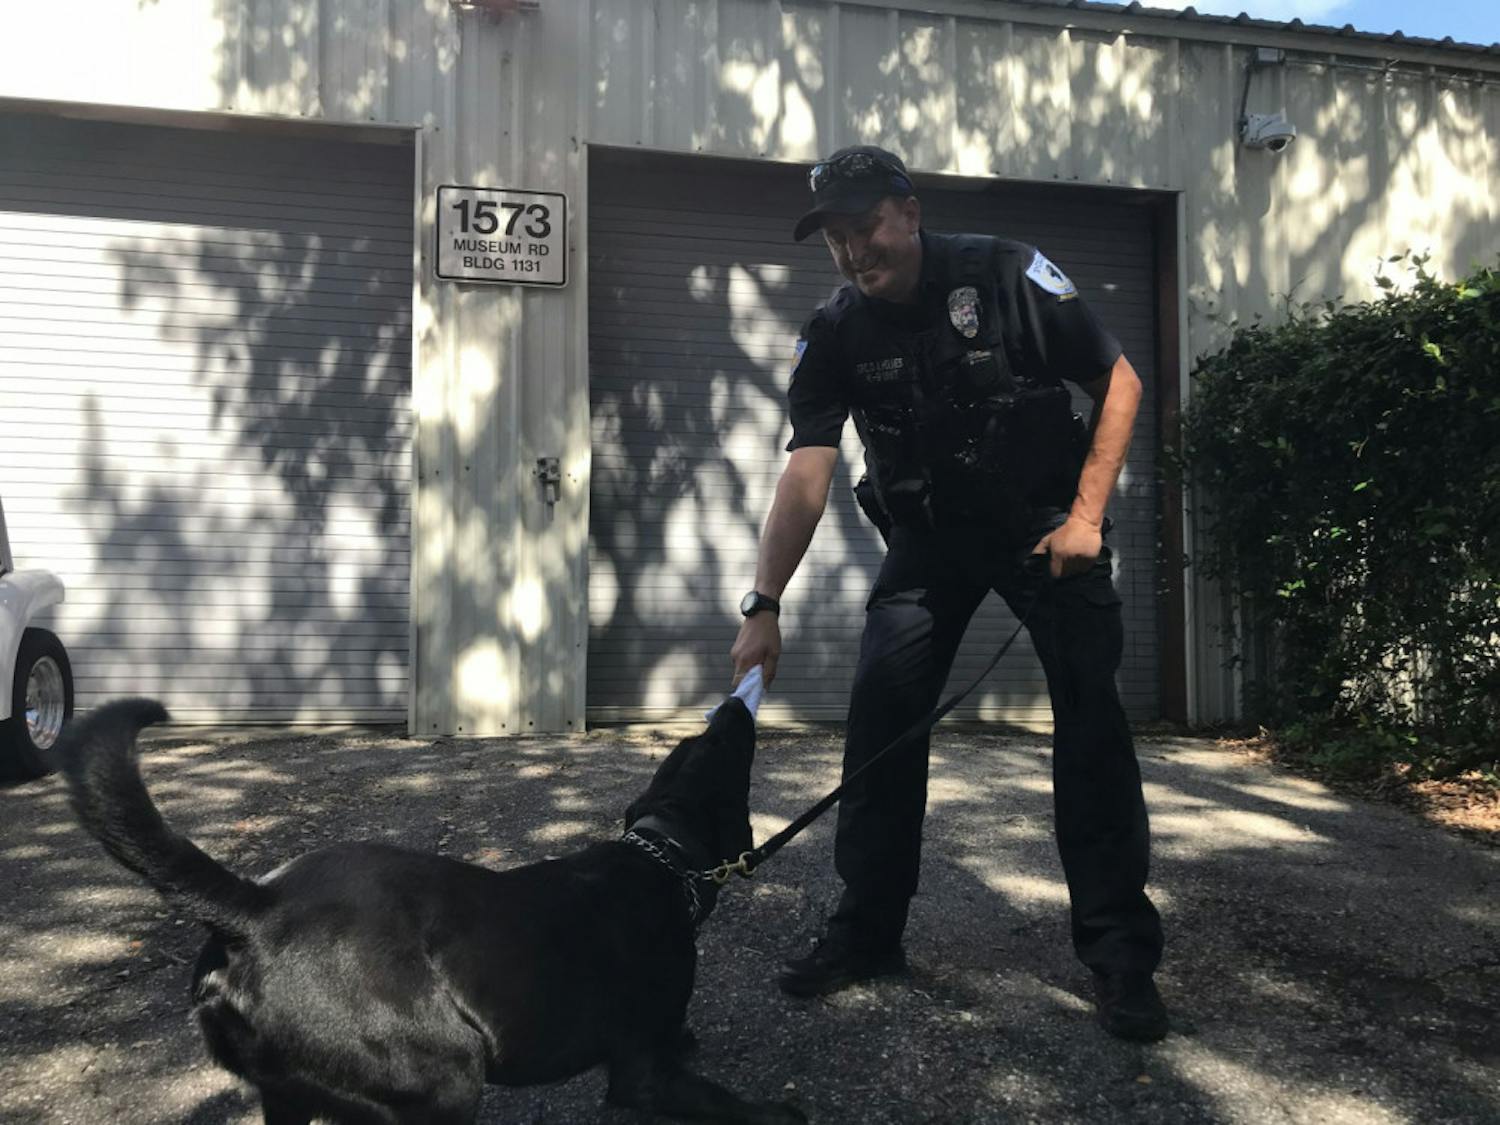 Boomer and officer Dale Holmes play tug-of-war with a rolled-up towel after Boomer finds the planted scent during a demonstration.